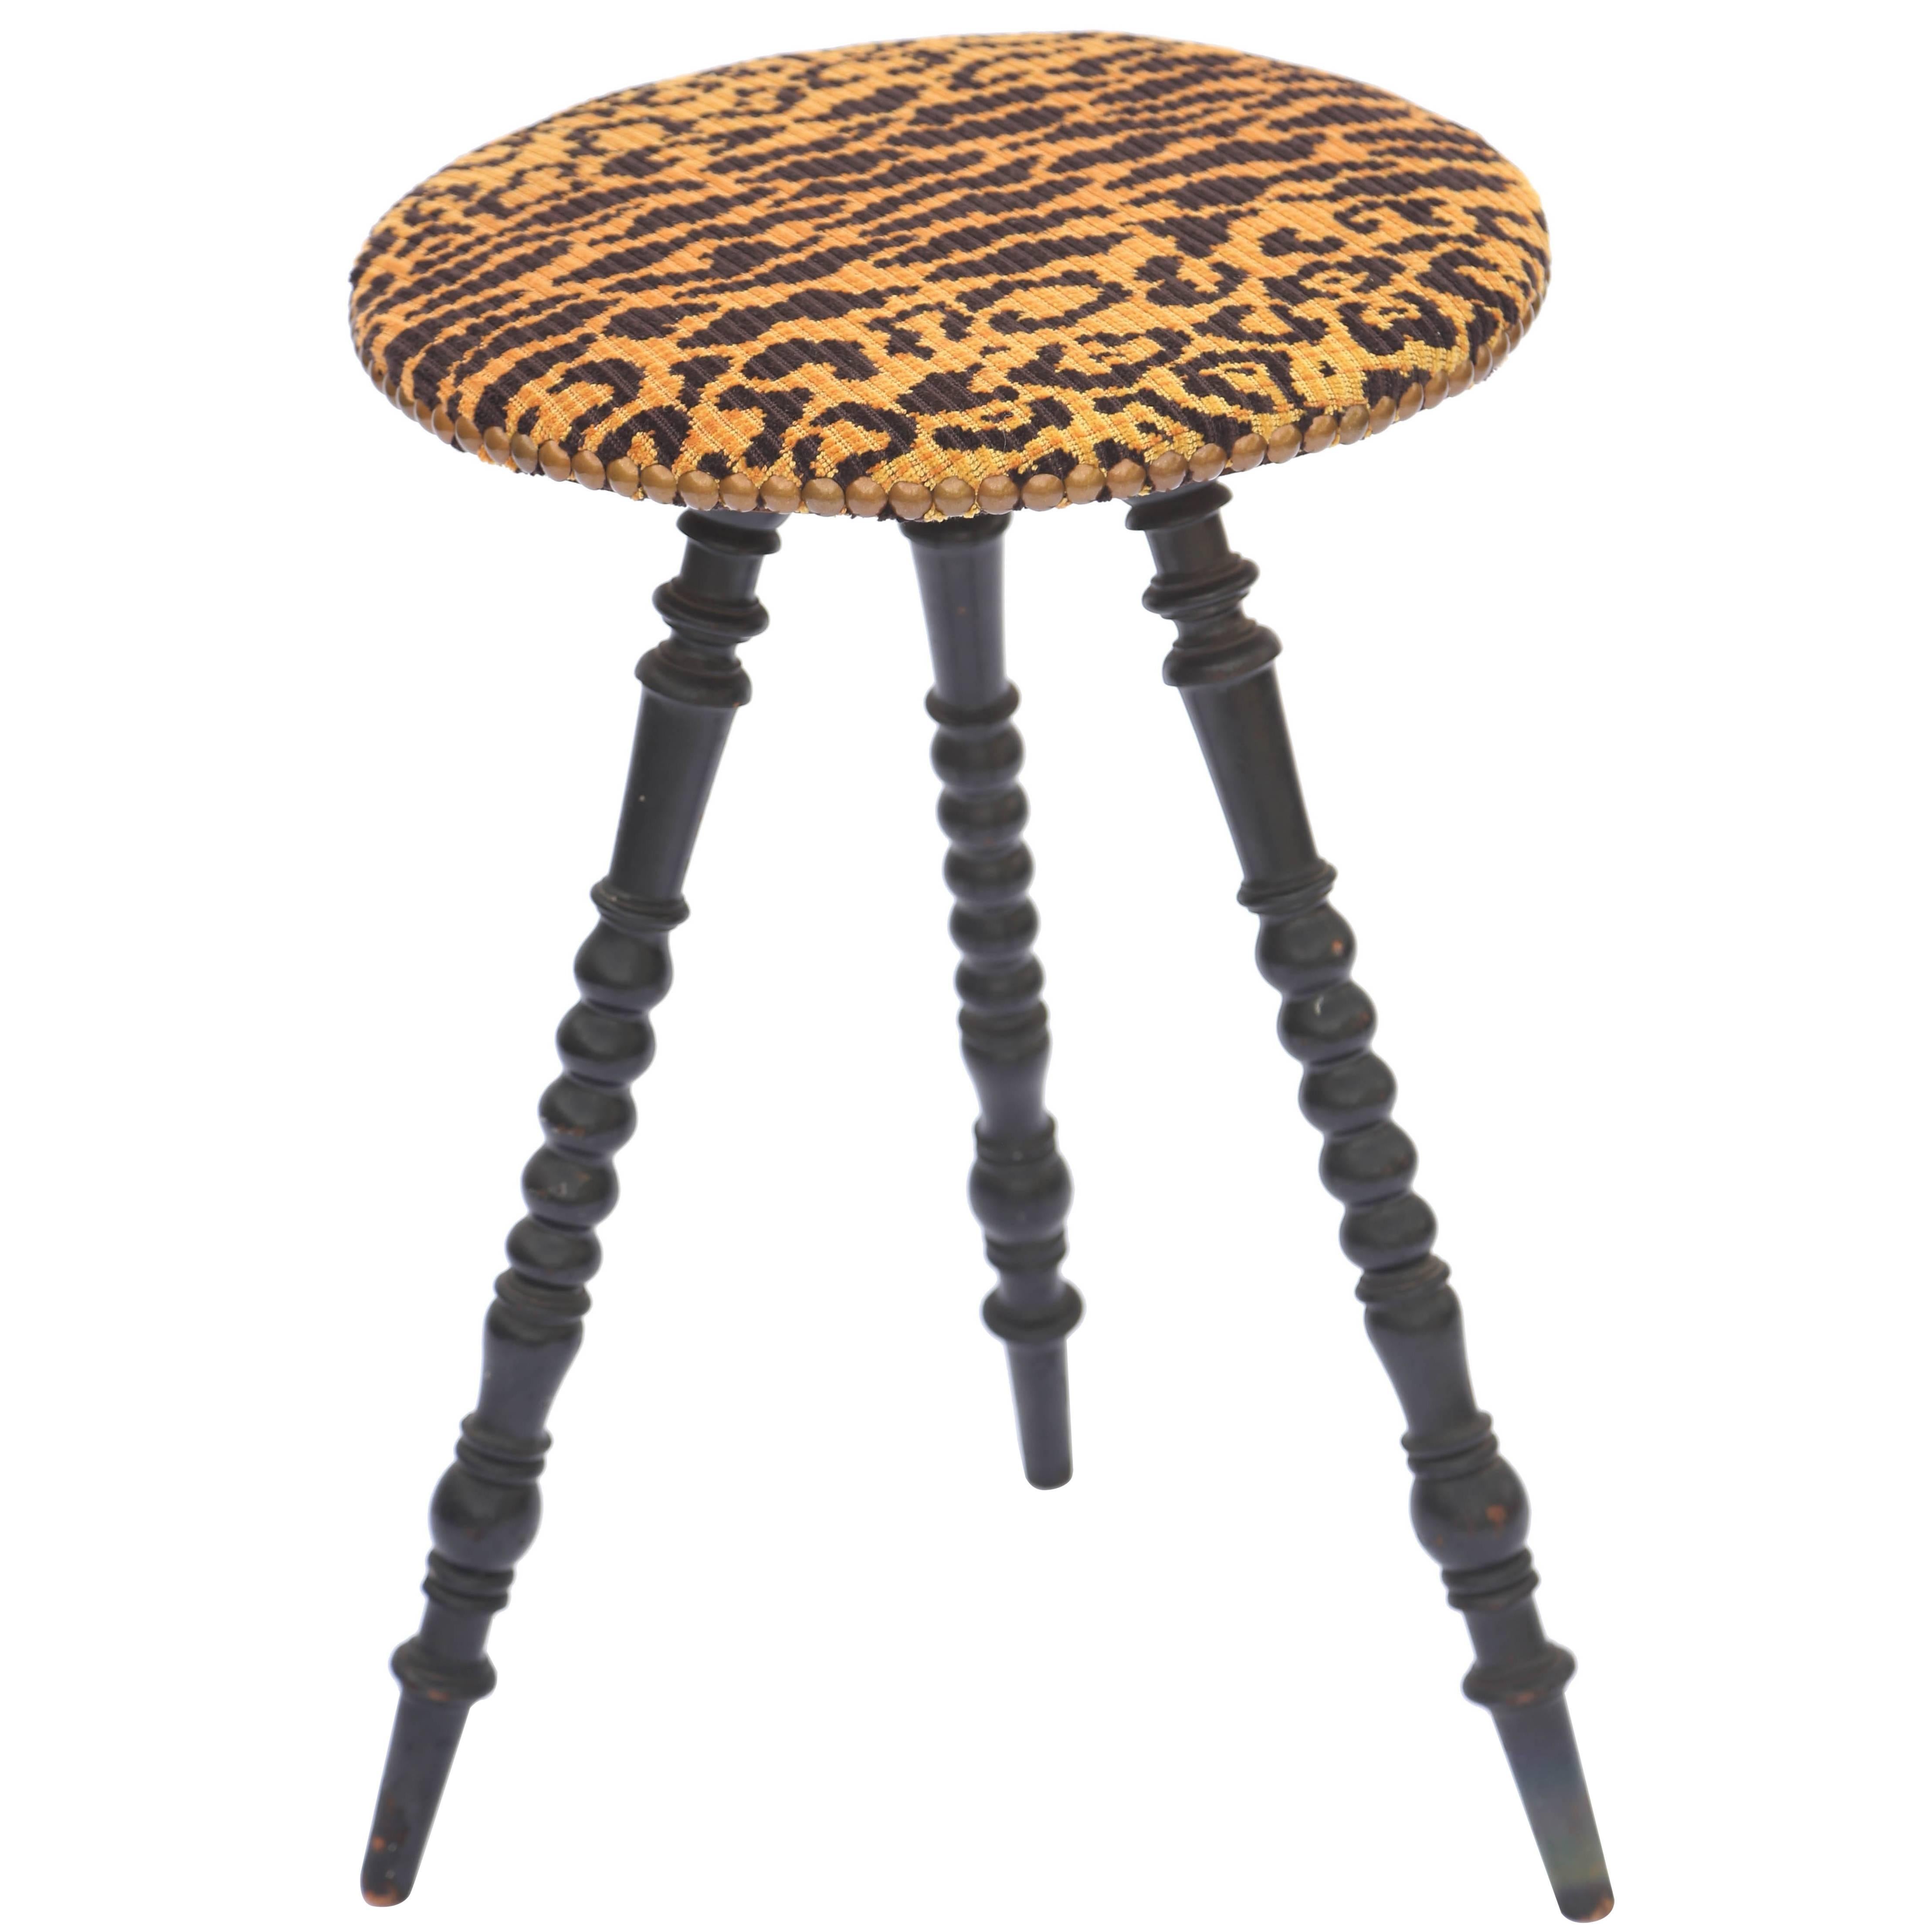 Victorian Turned Leg Tripod Table with Upholstered Round Top in Leopard For Sale